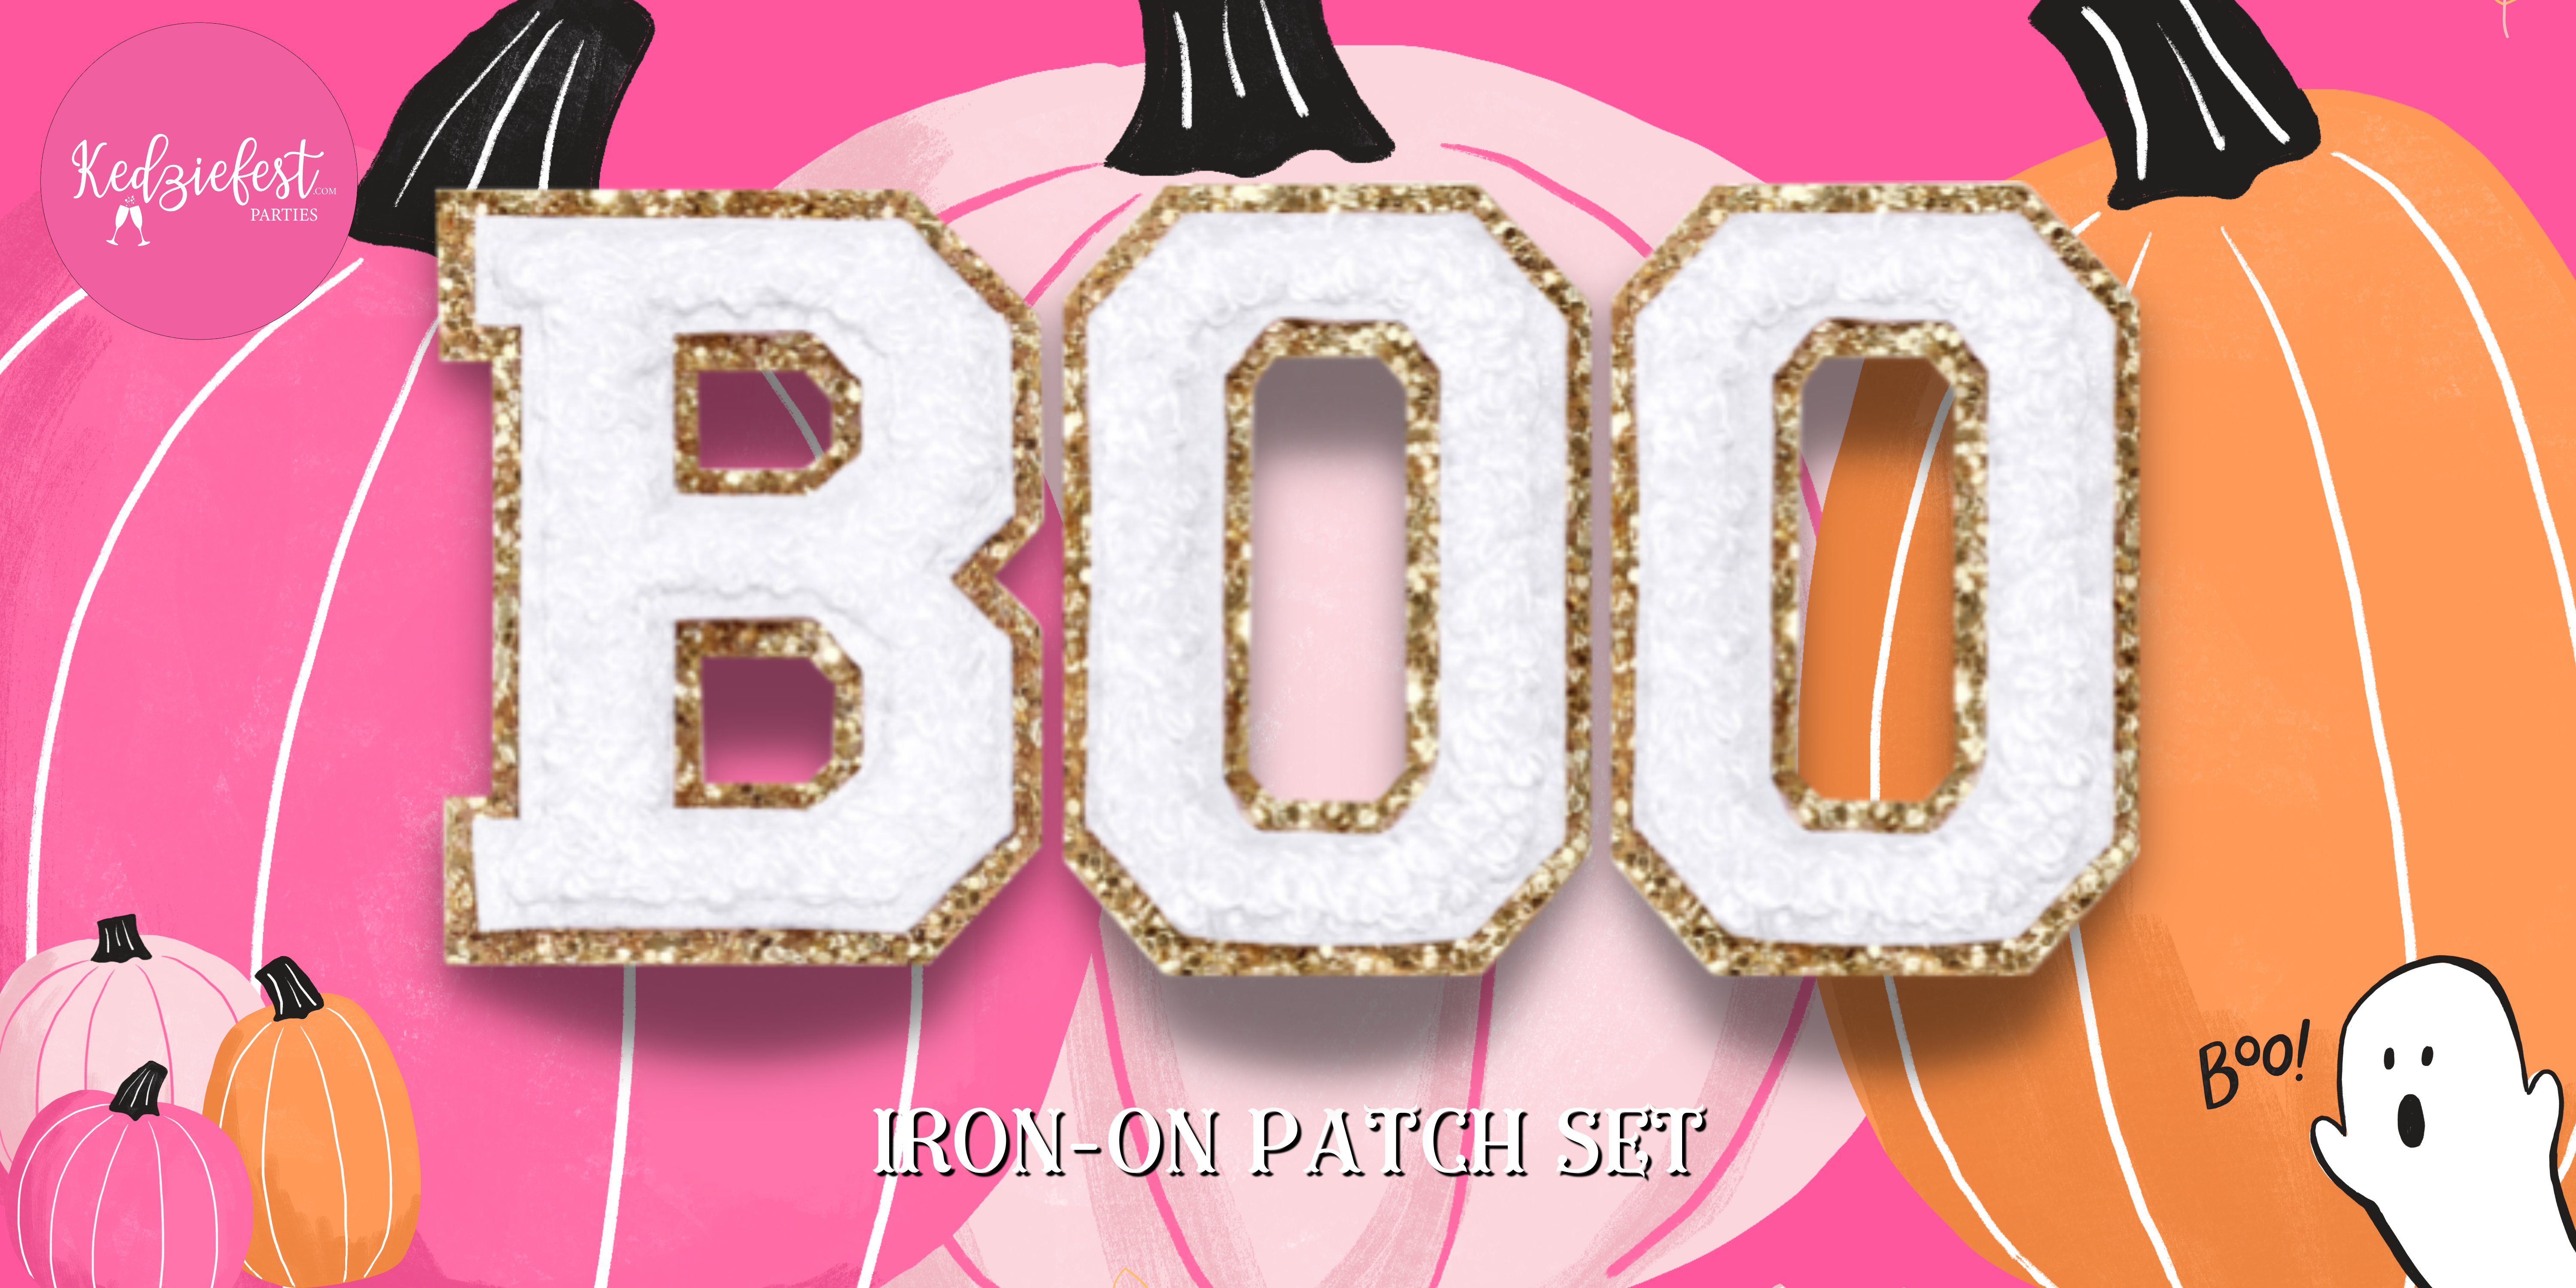 BOO Iron-On Patch Set by Kedziefest Parties